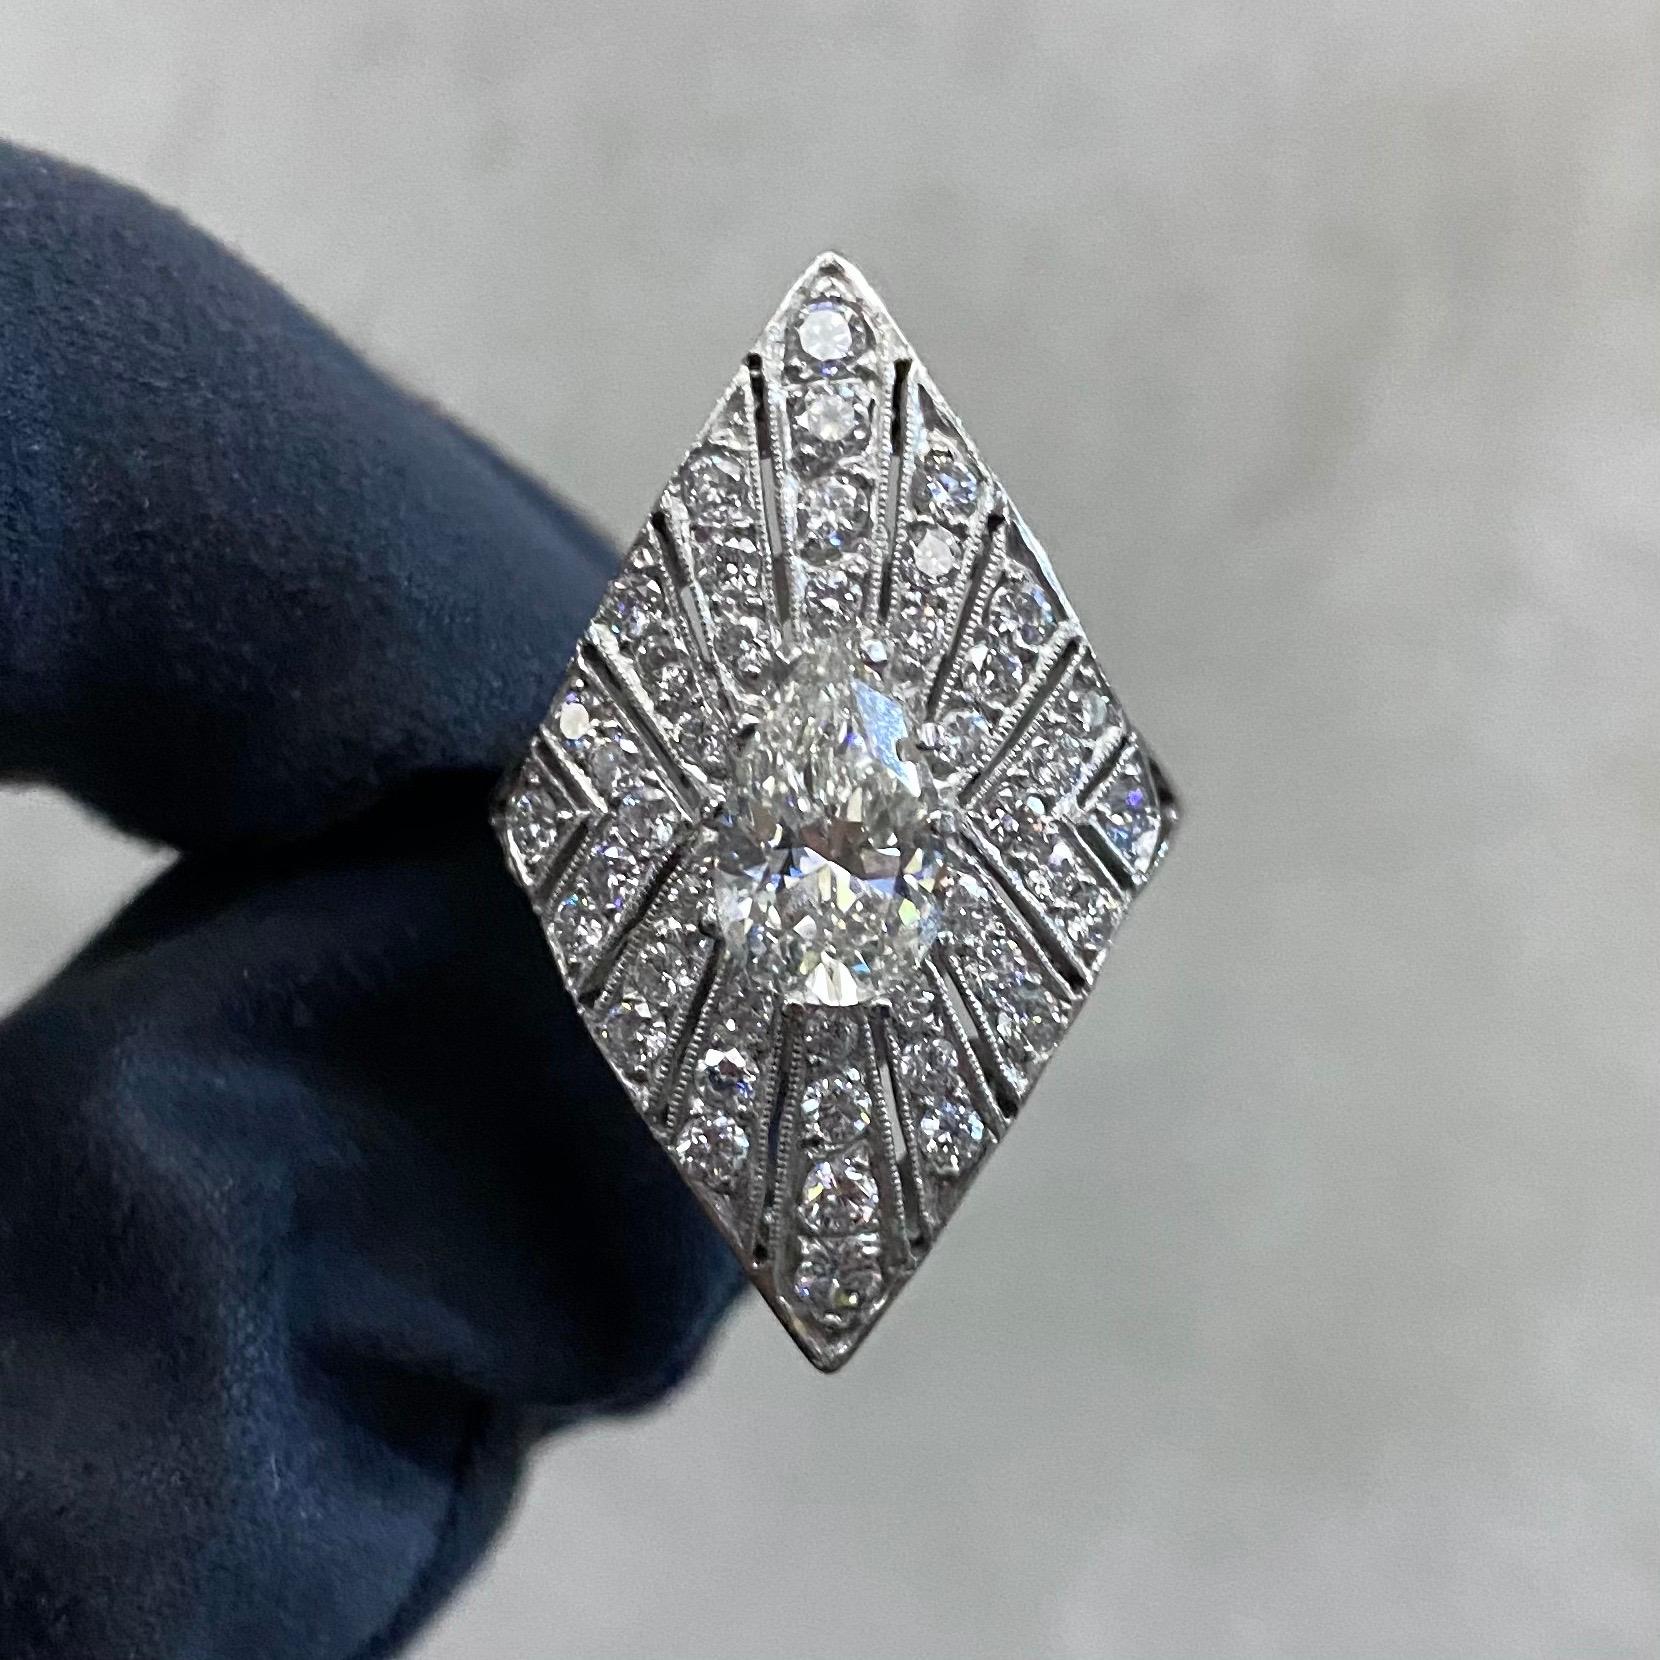 A GIA certified 1.24 carat J VS2 pear brilliant-cut diamond and round brilliant-cut diamond shield-shape cocktail or dress ring in platinum, circa 2000s. A spectacular jewel of an Art Deco style shield design with pierced openwork and millegrain